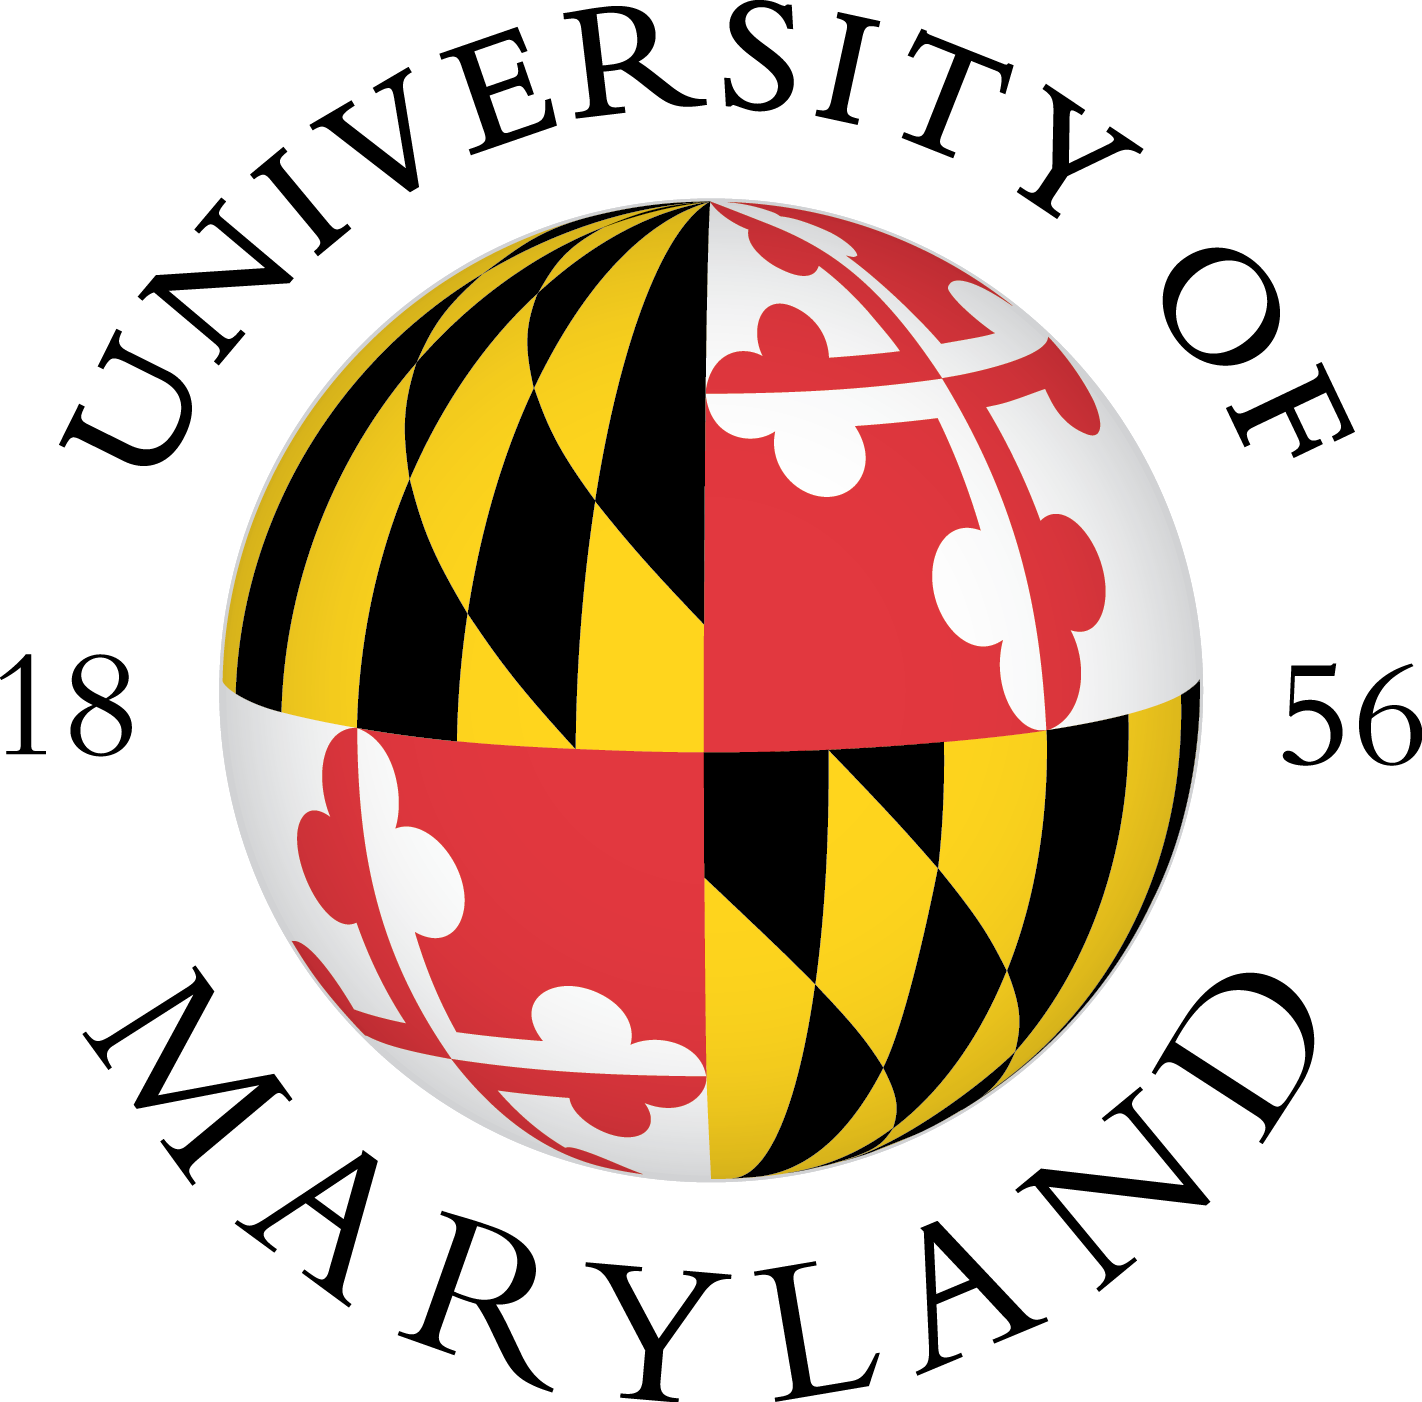 Find out more about the University of Maryland